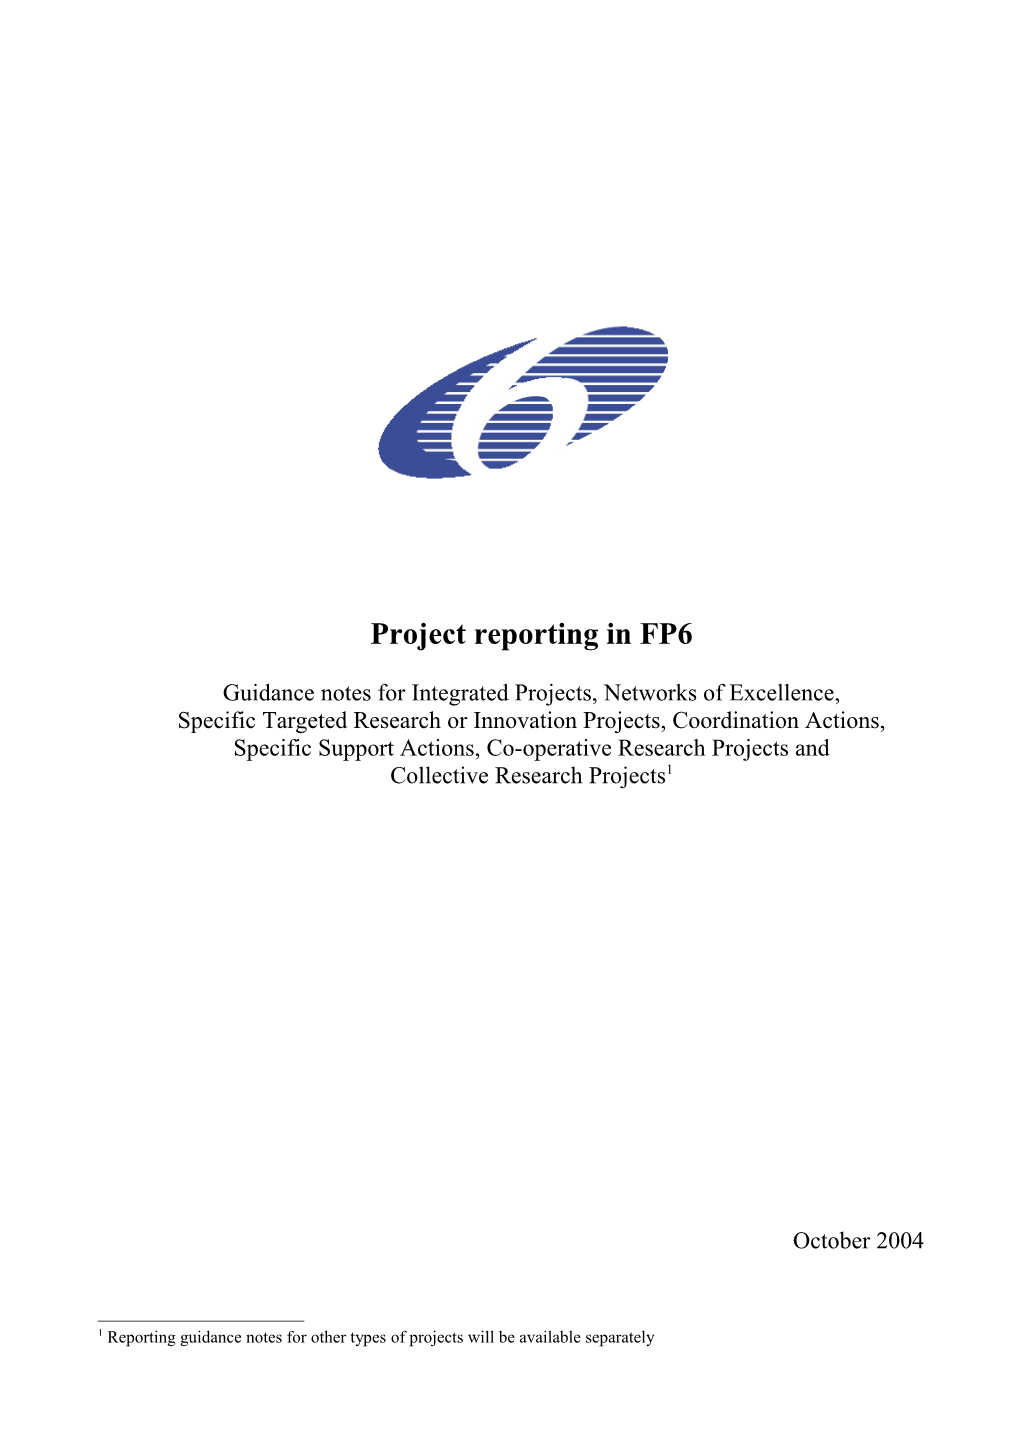 Project Reporting in FP6